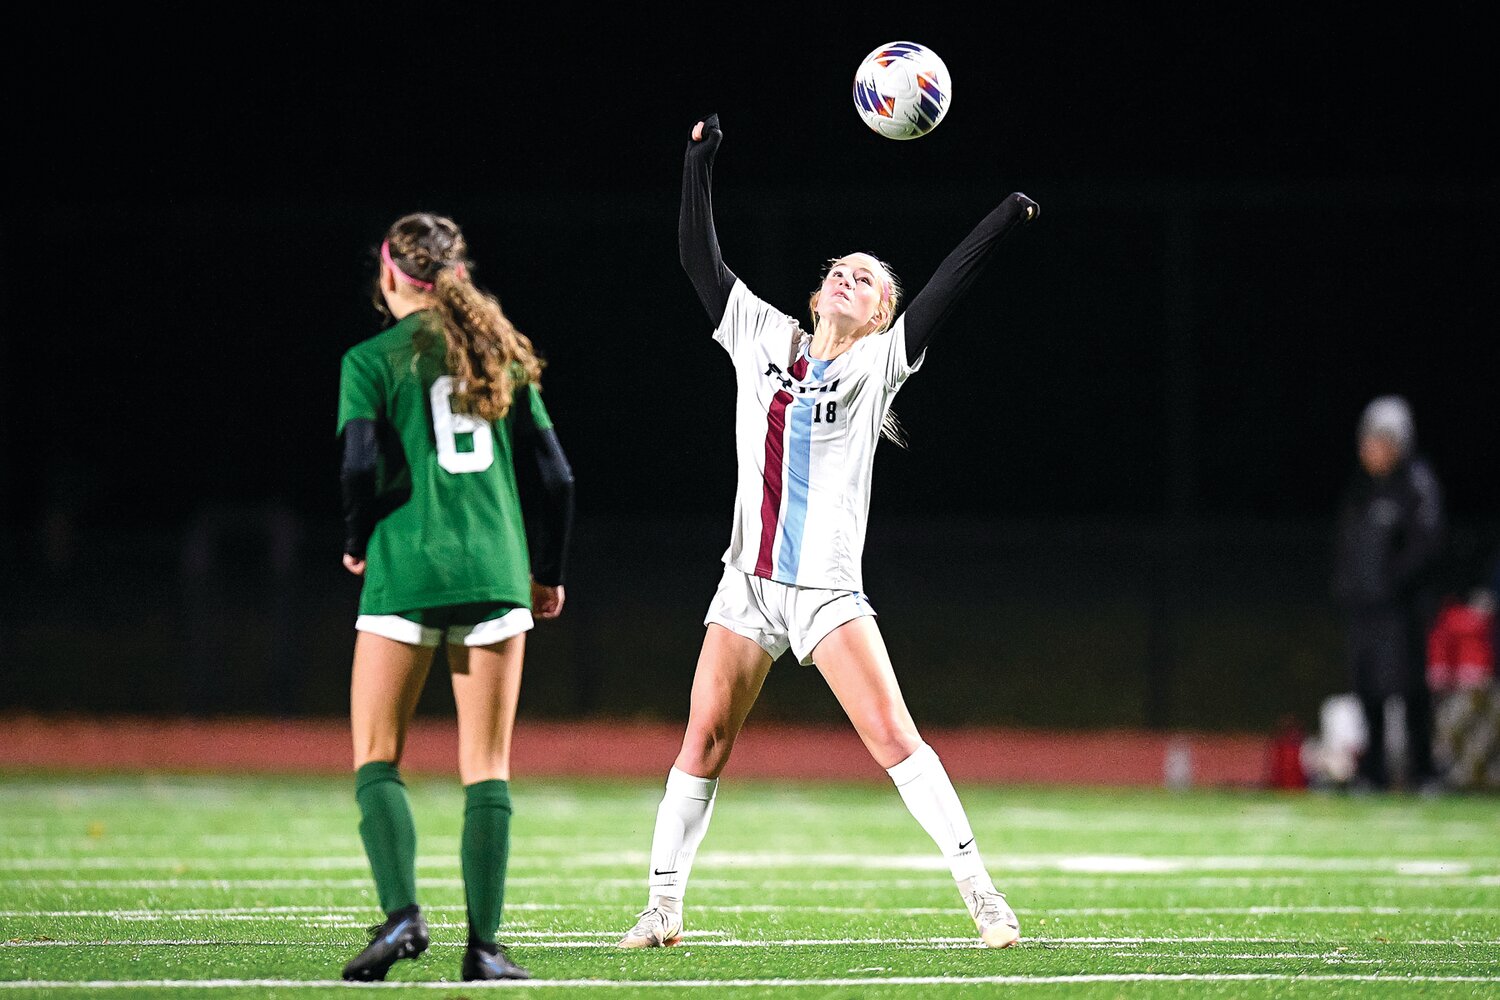 Faith Christian’s Sarah Frei lines up a header at midfield during the first half.